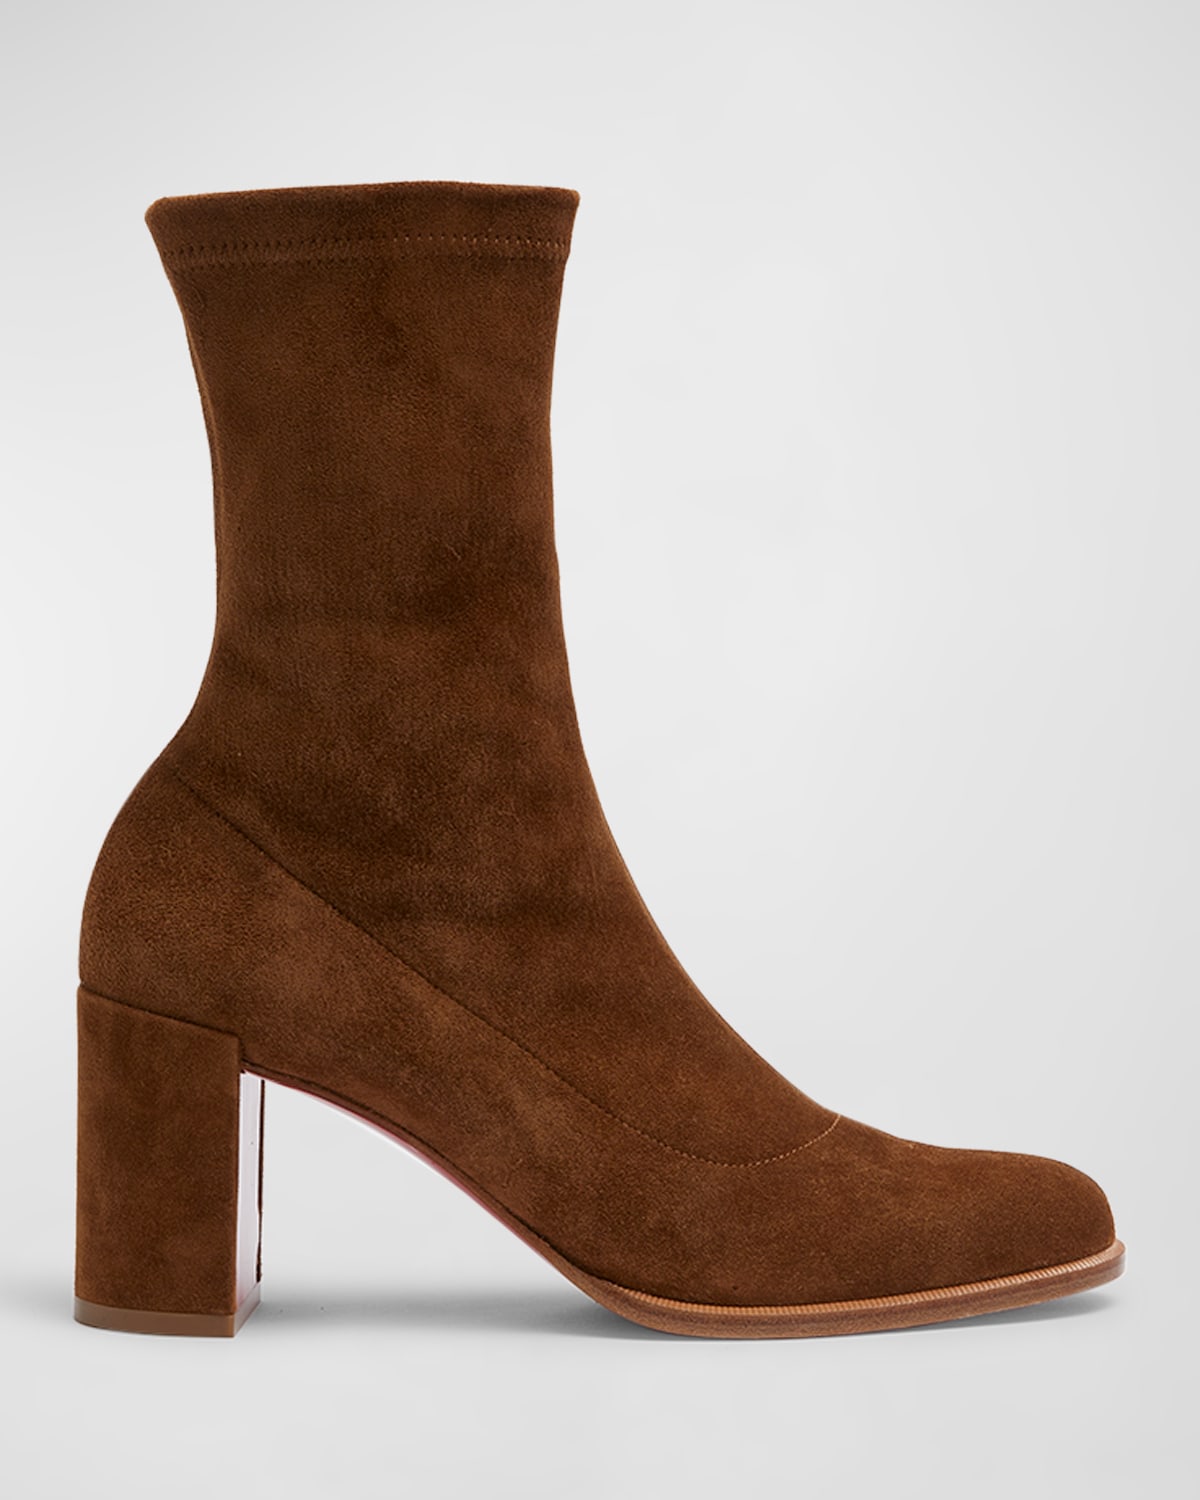 Christian Louboutin Adoxa Stretch Suede Red-sole Booties In Rhea